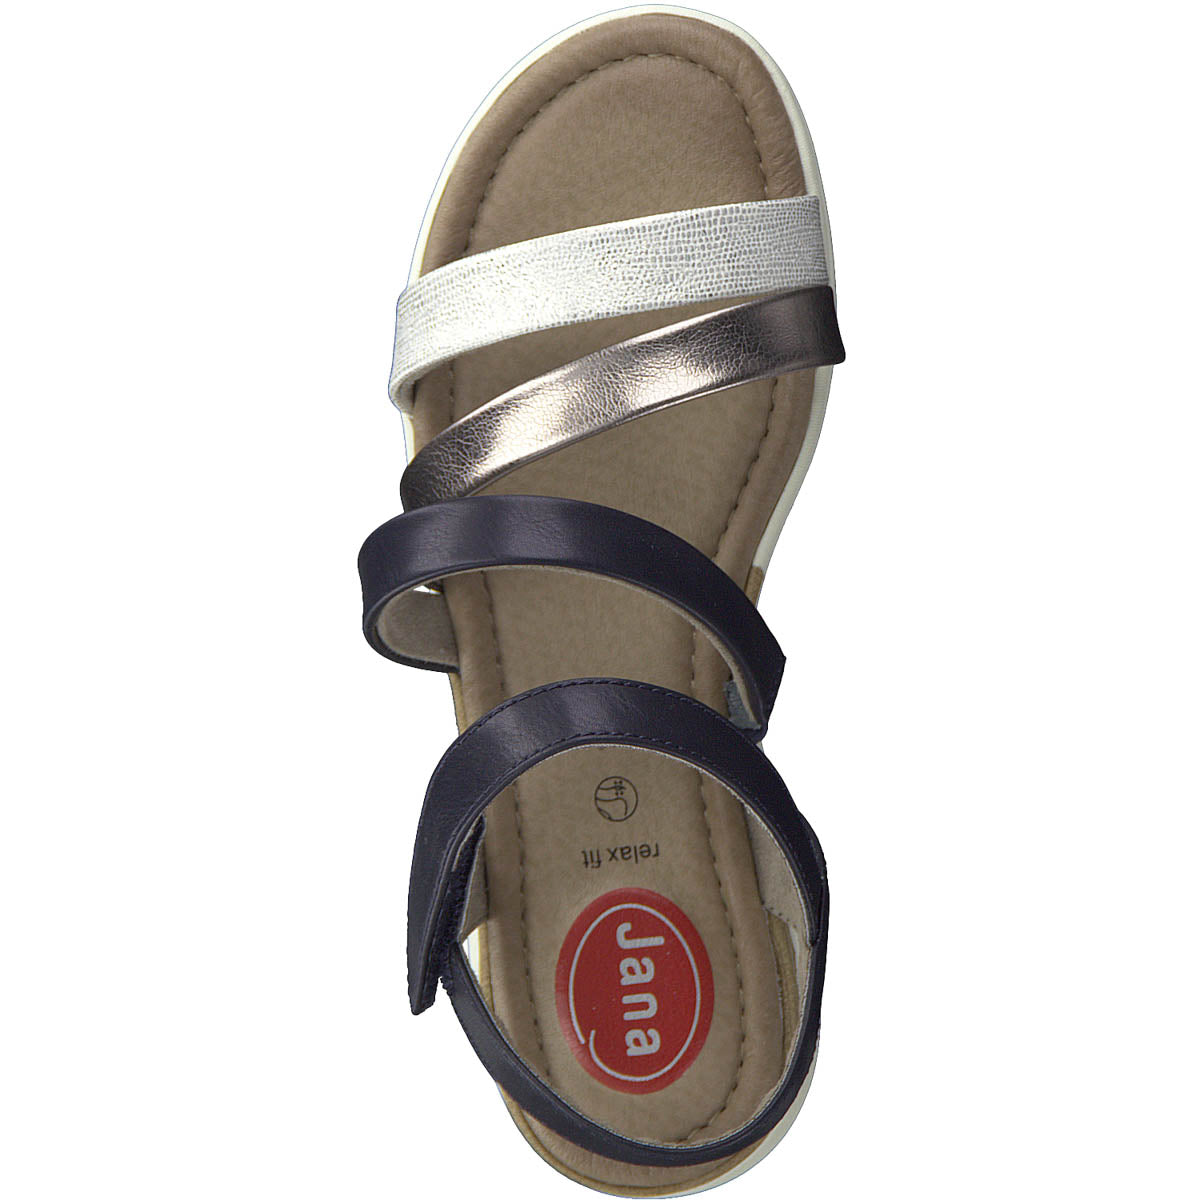 City Slicker Sandals: Chic and Practical for Urban Summer Style